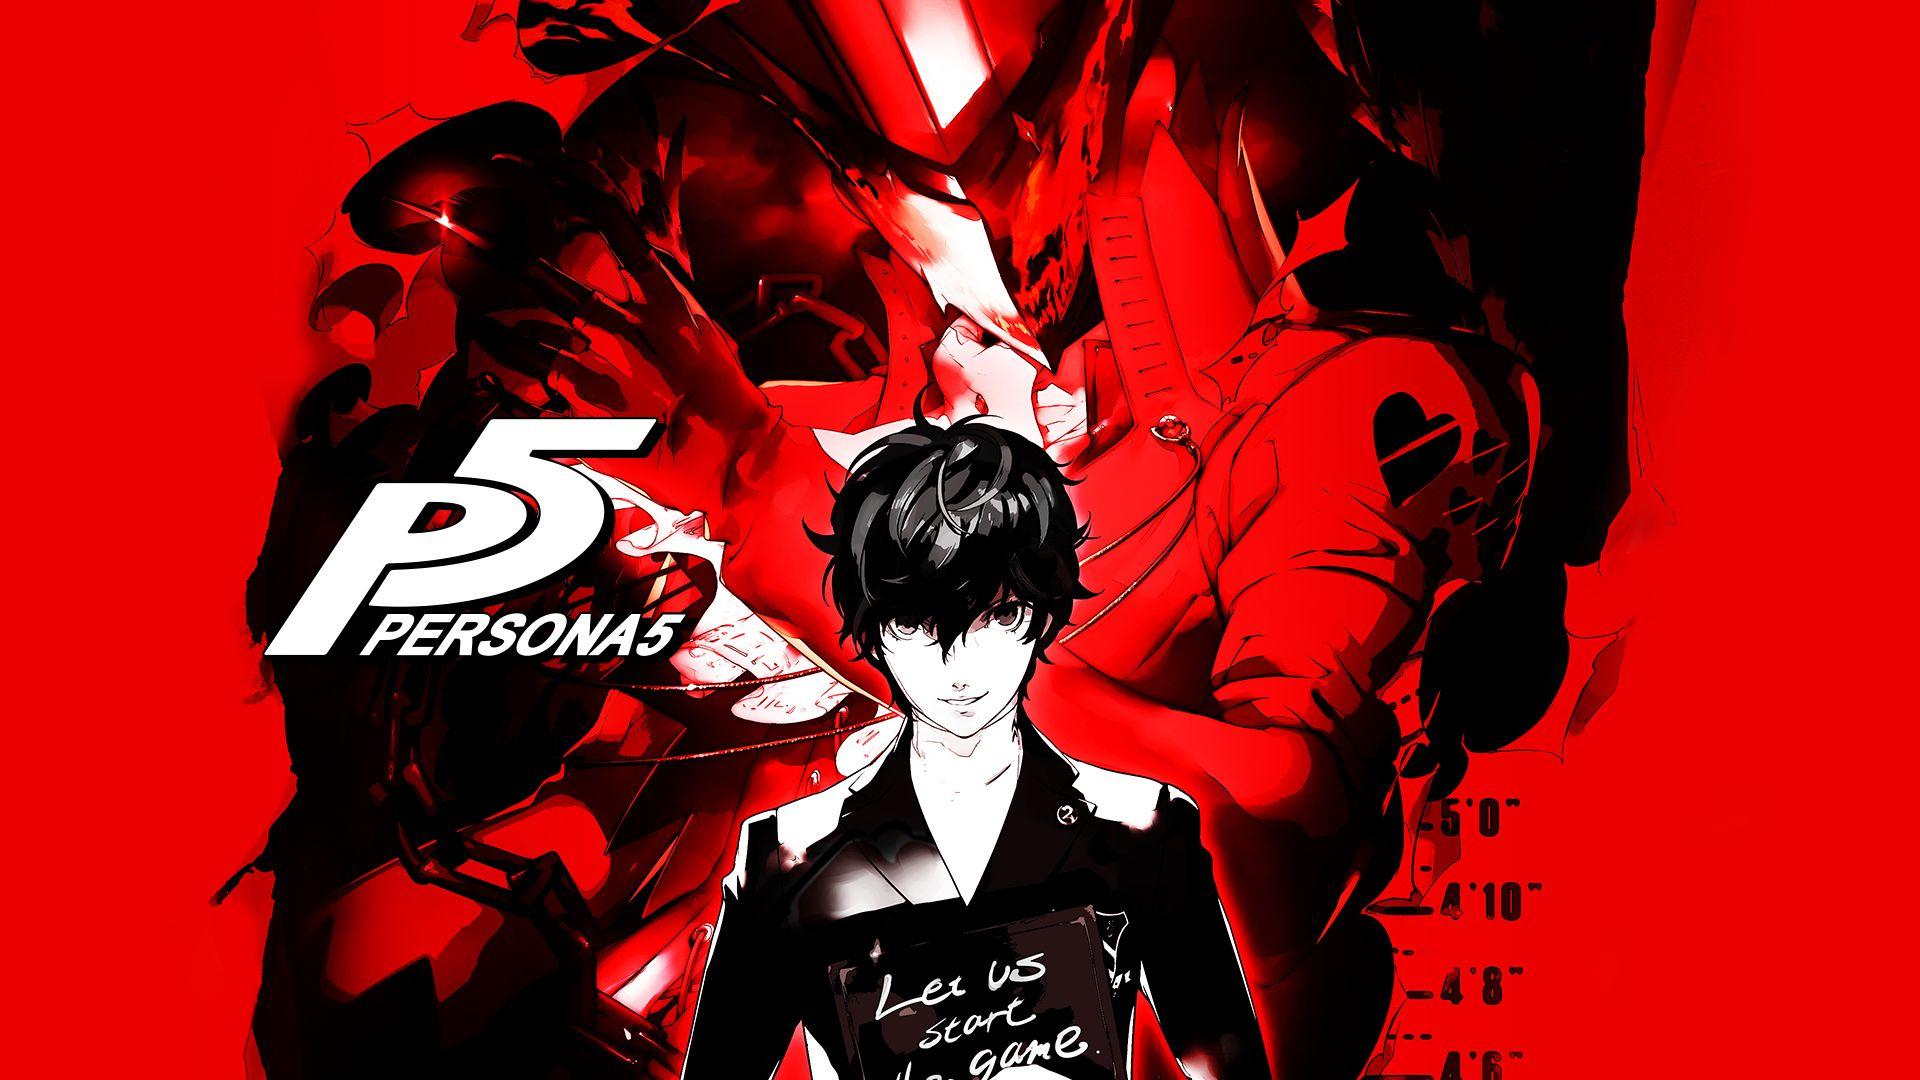 Persona 5 Crowned EGX Rezzed 2017 Game of the Show